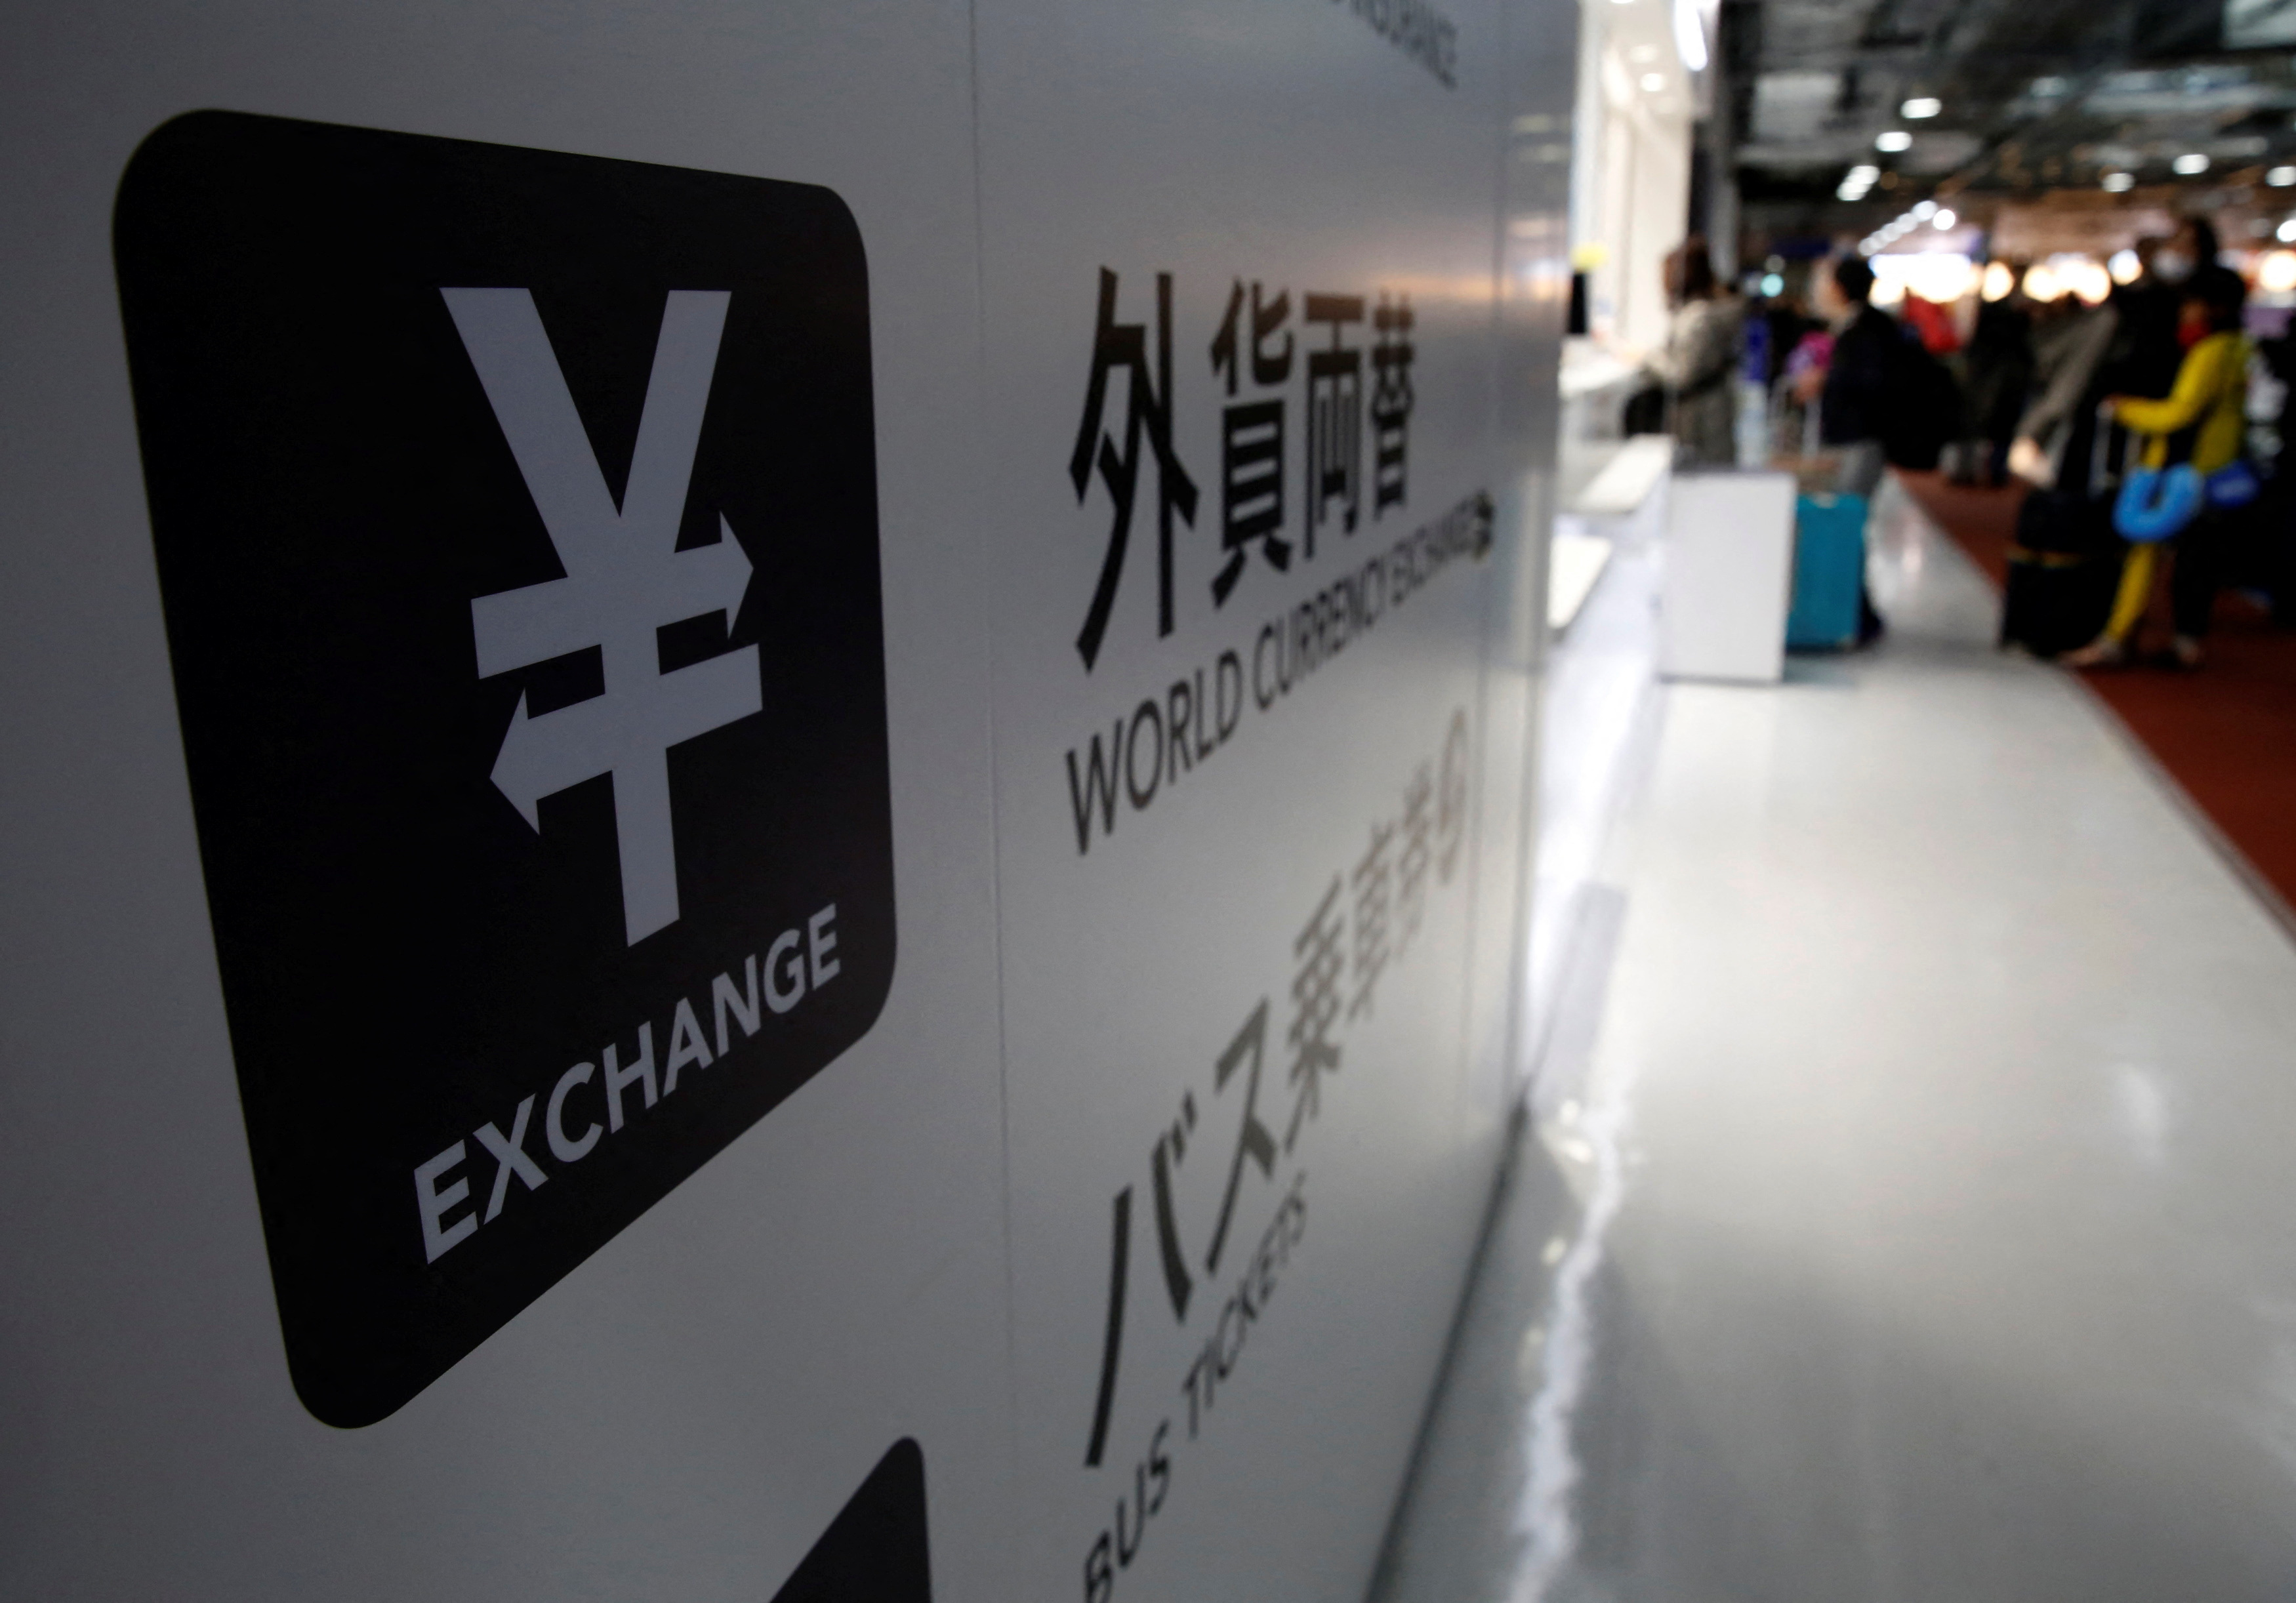 A Japanese Yen currency sign is seen at a currency exchange office as people line up to exchange money at Narita International airport